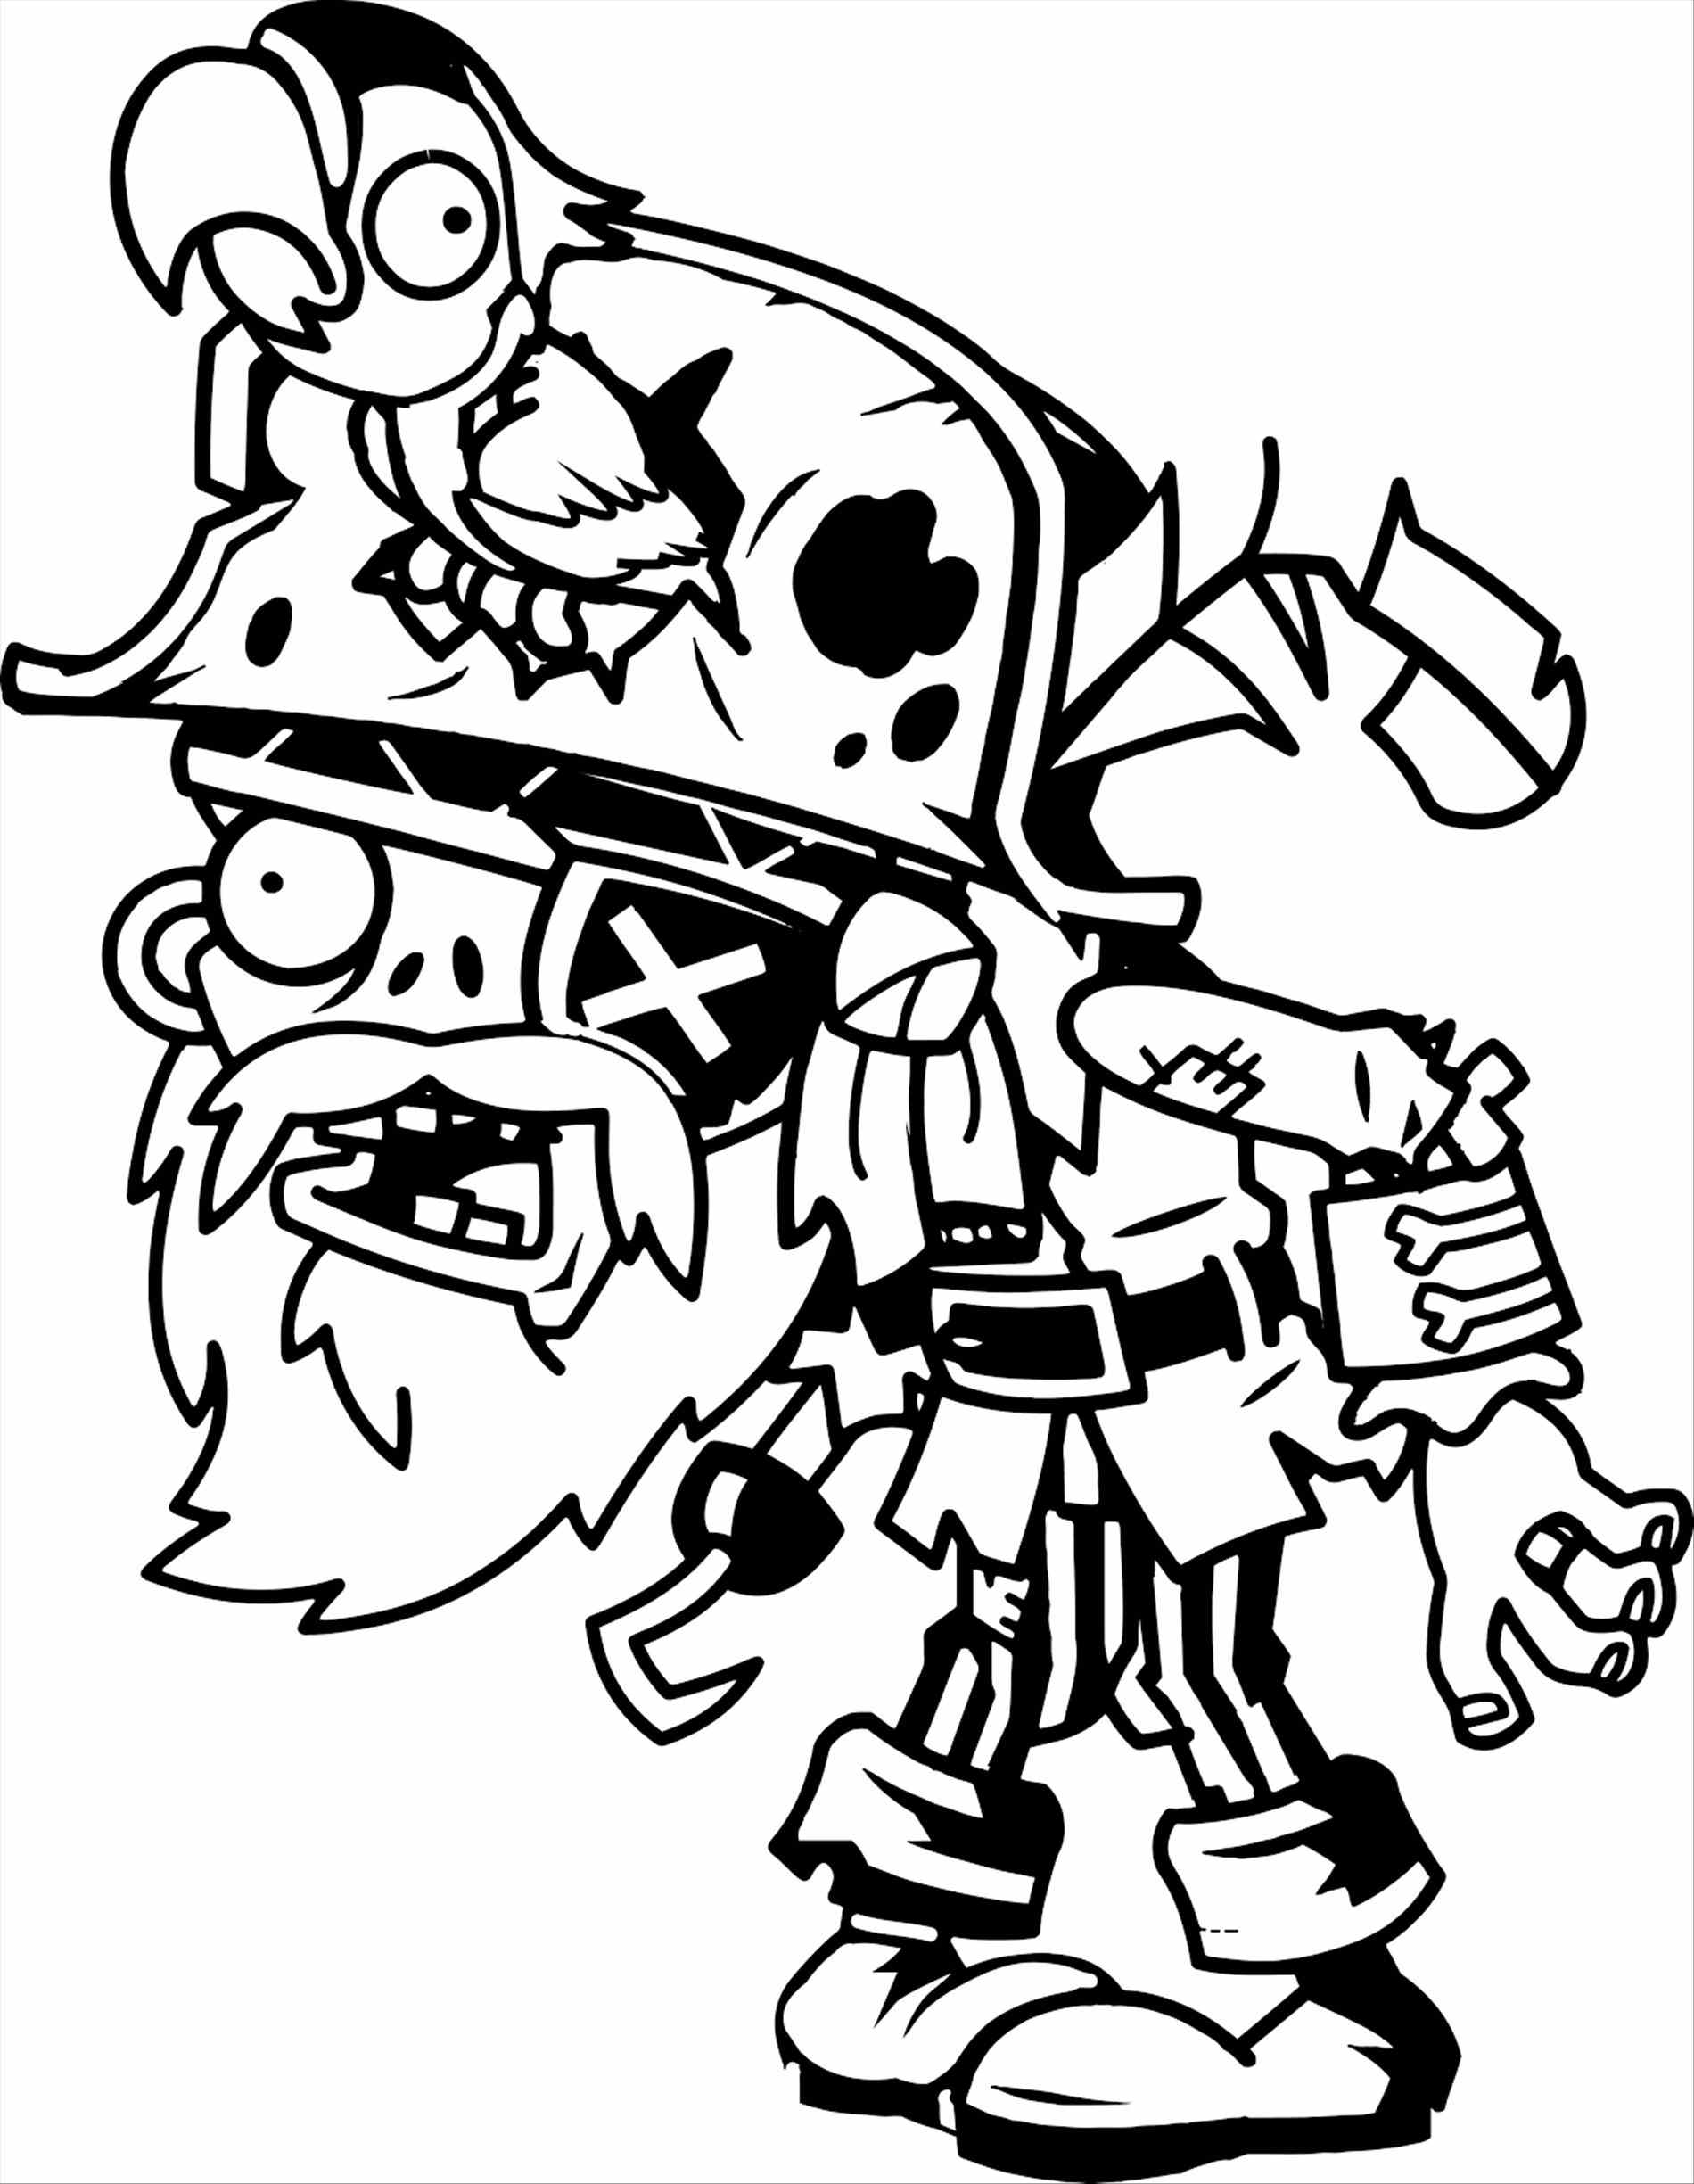 Cute Zombie Coloring Pages at GetColorings.com | Free printable